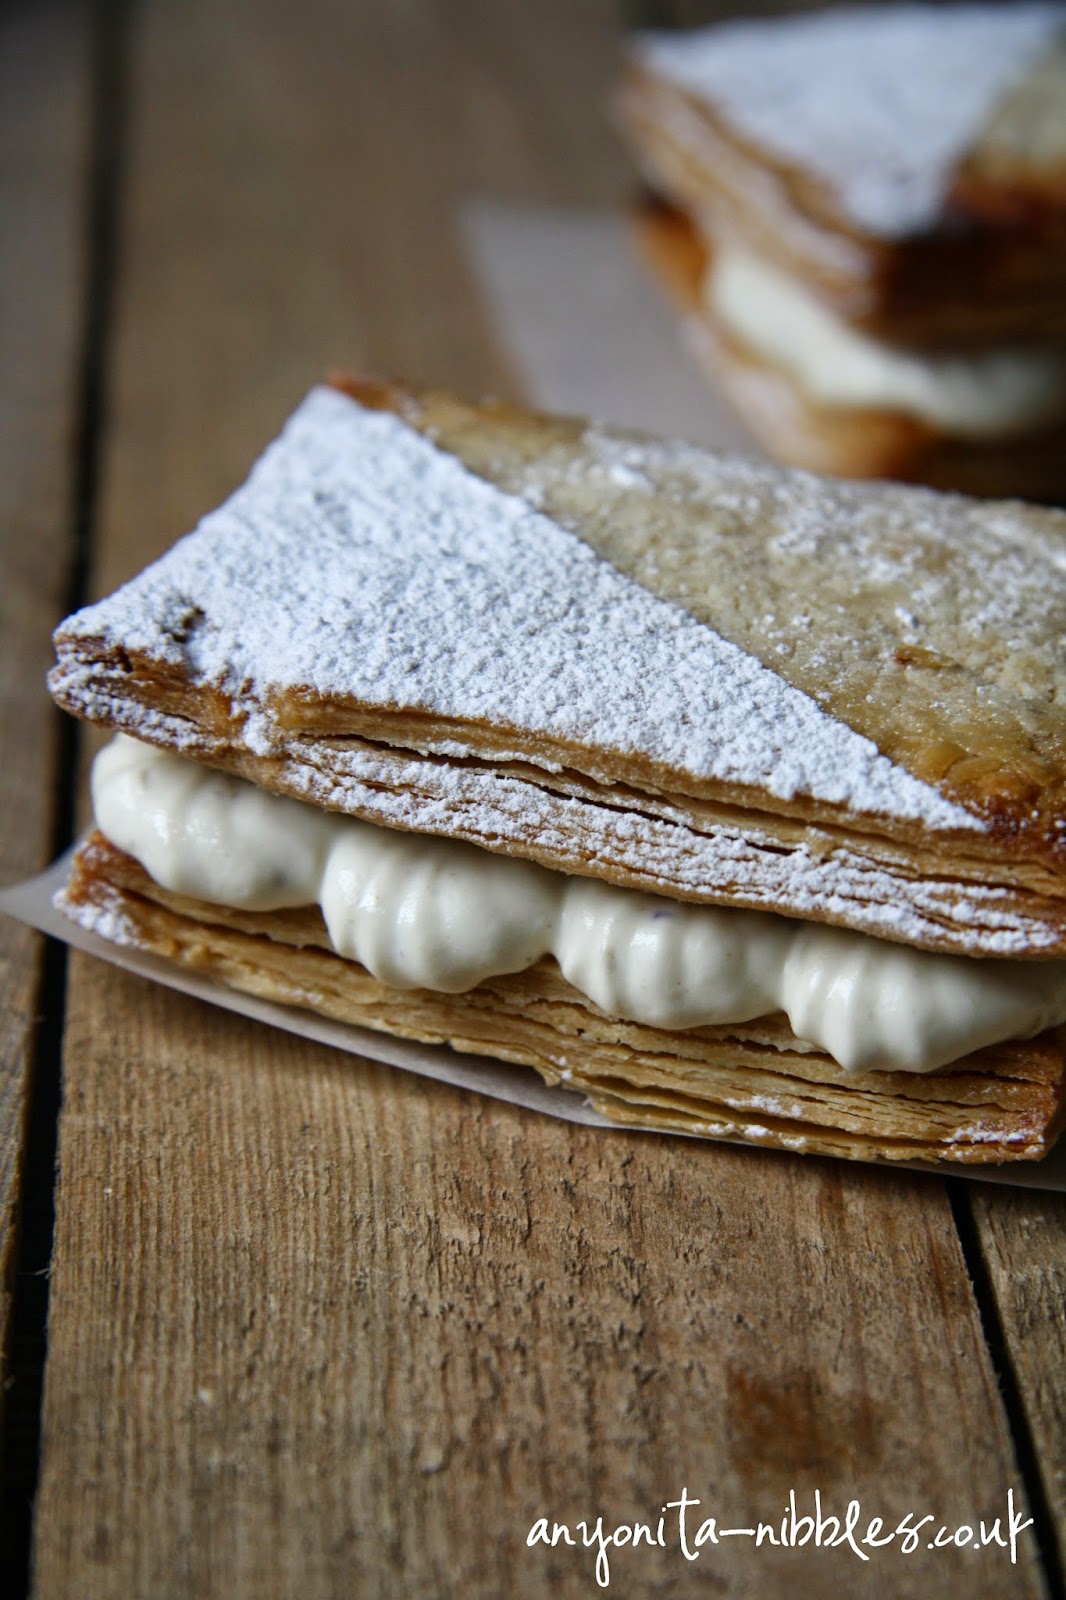 http://www.anyonita-nibbles.co.uk/2015/03/gluten-free-mille-feuille.html